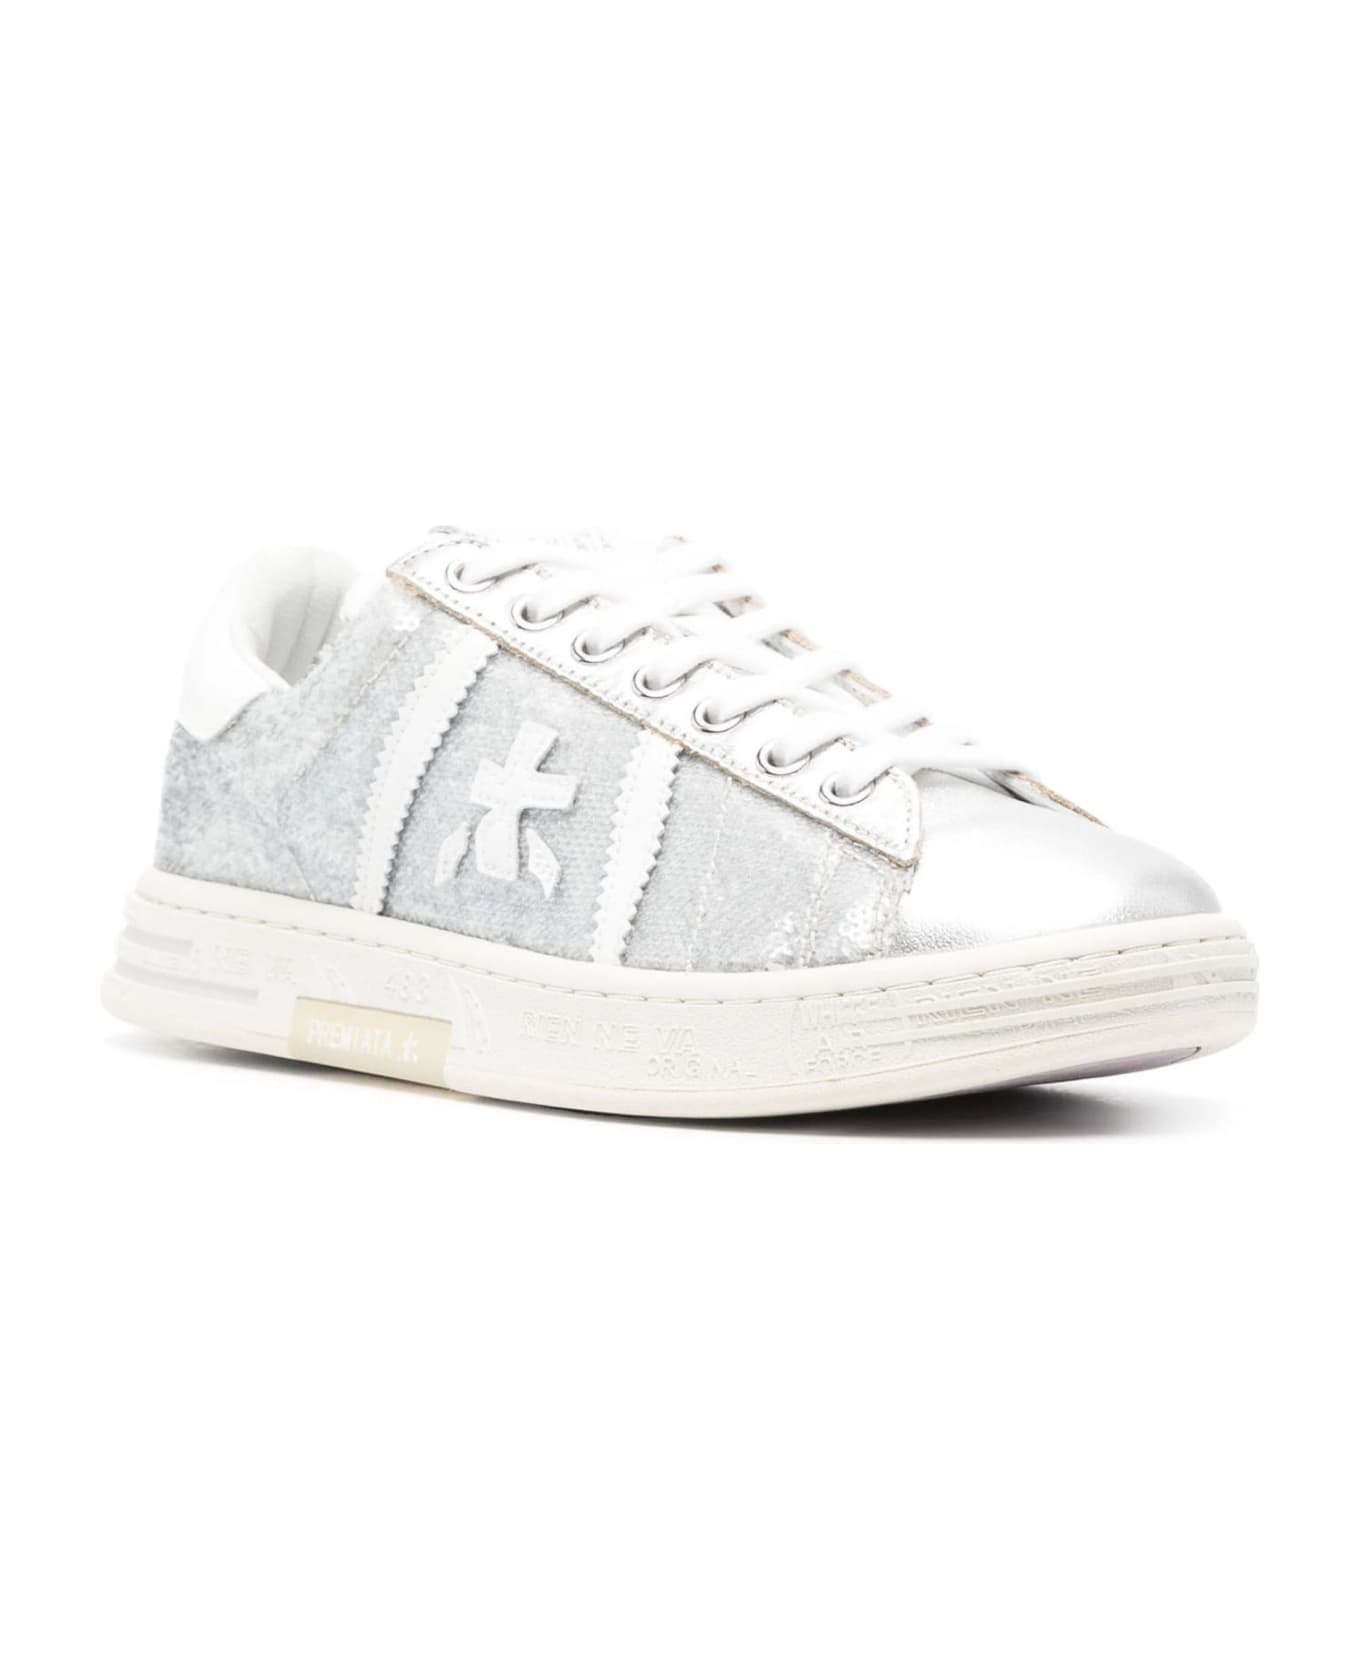 Premiata Silver Leather Russell Sneakers - Silver